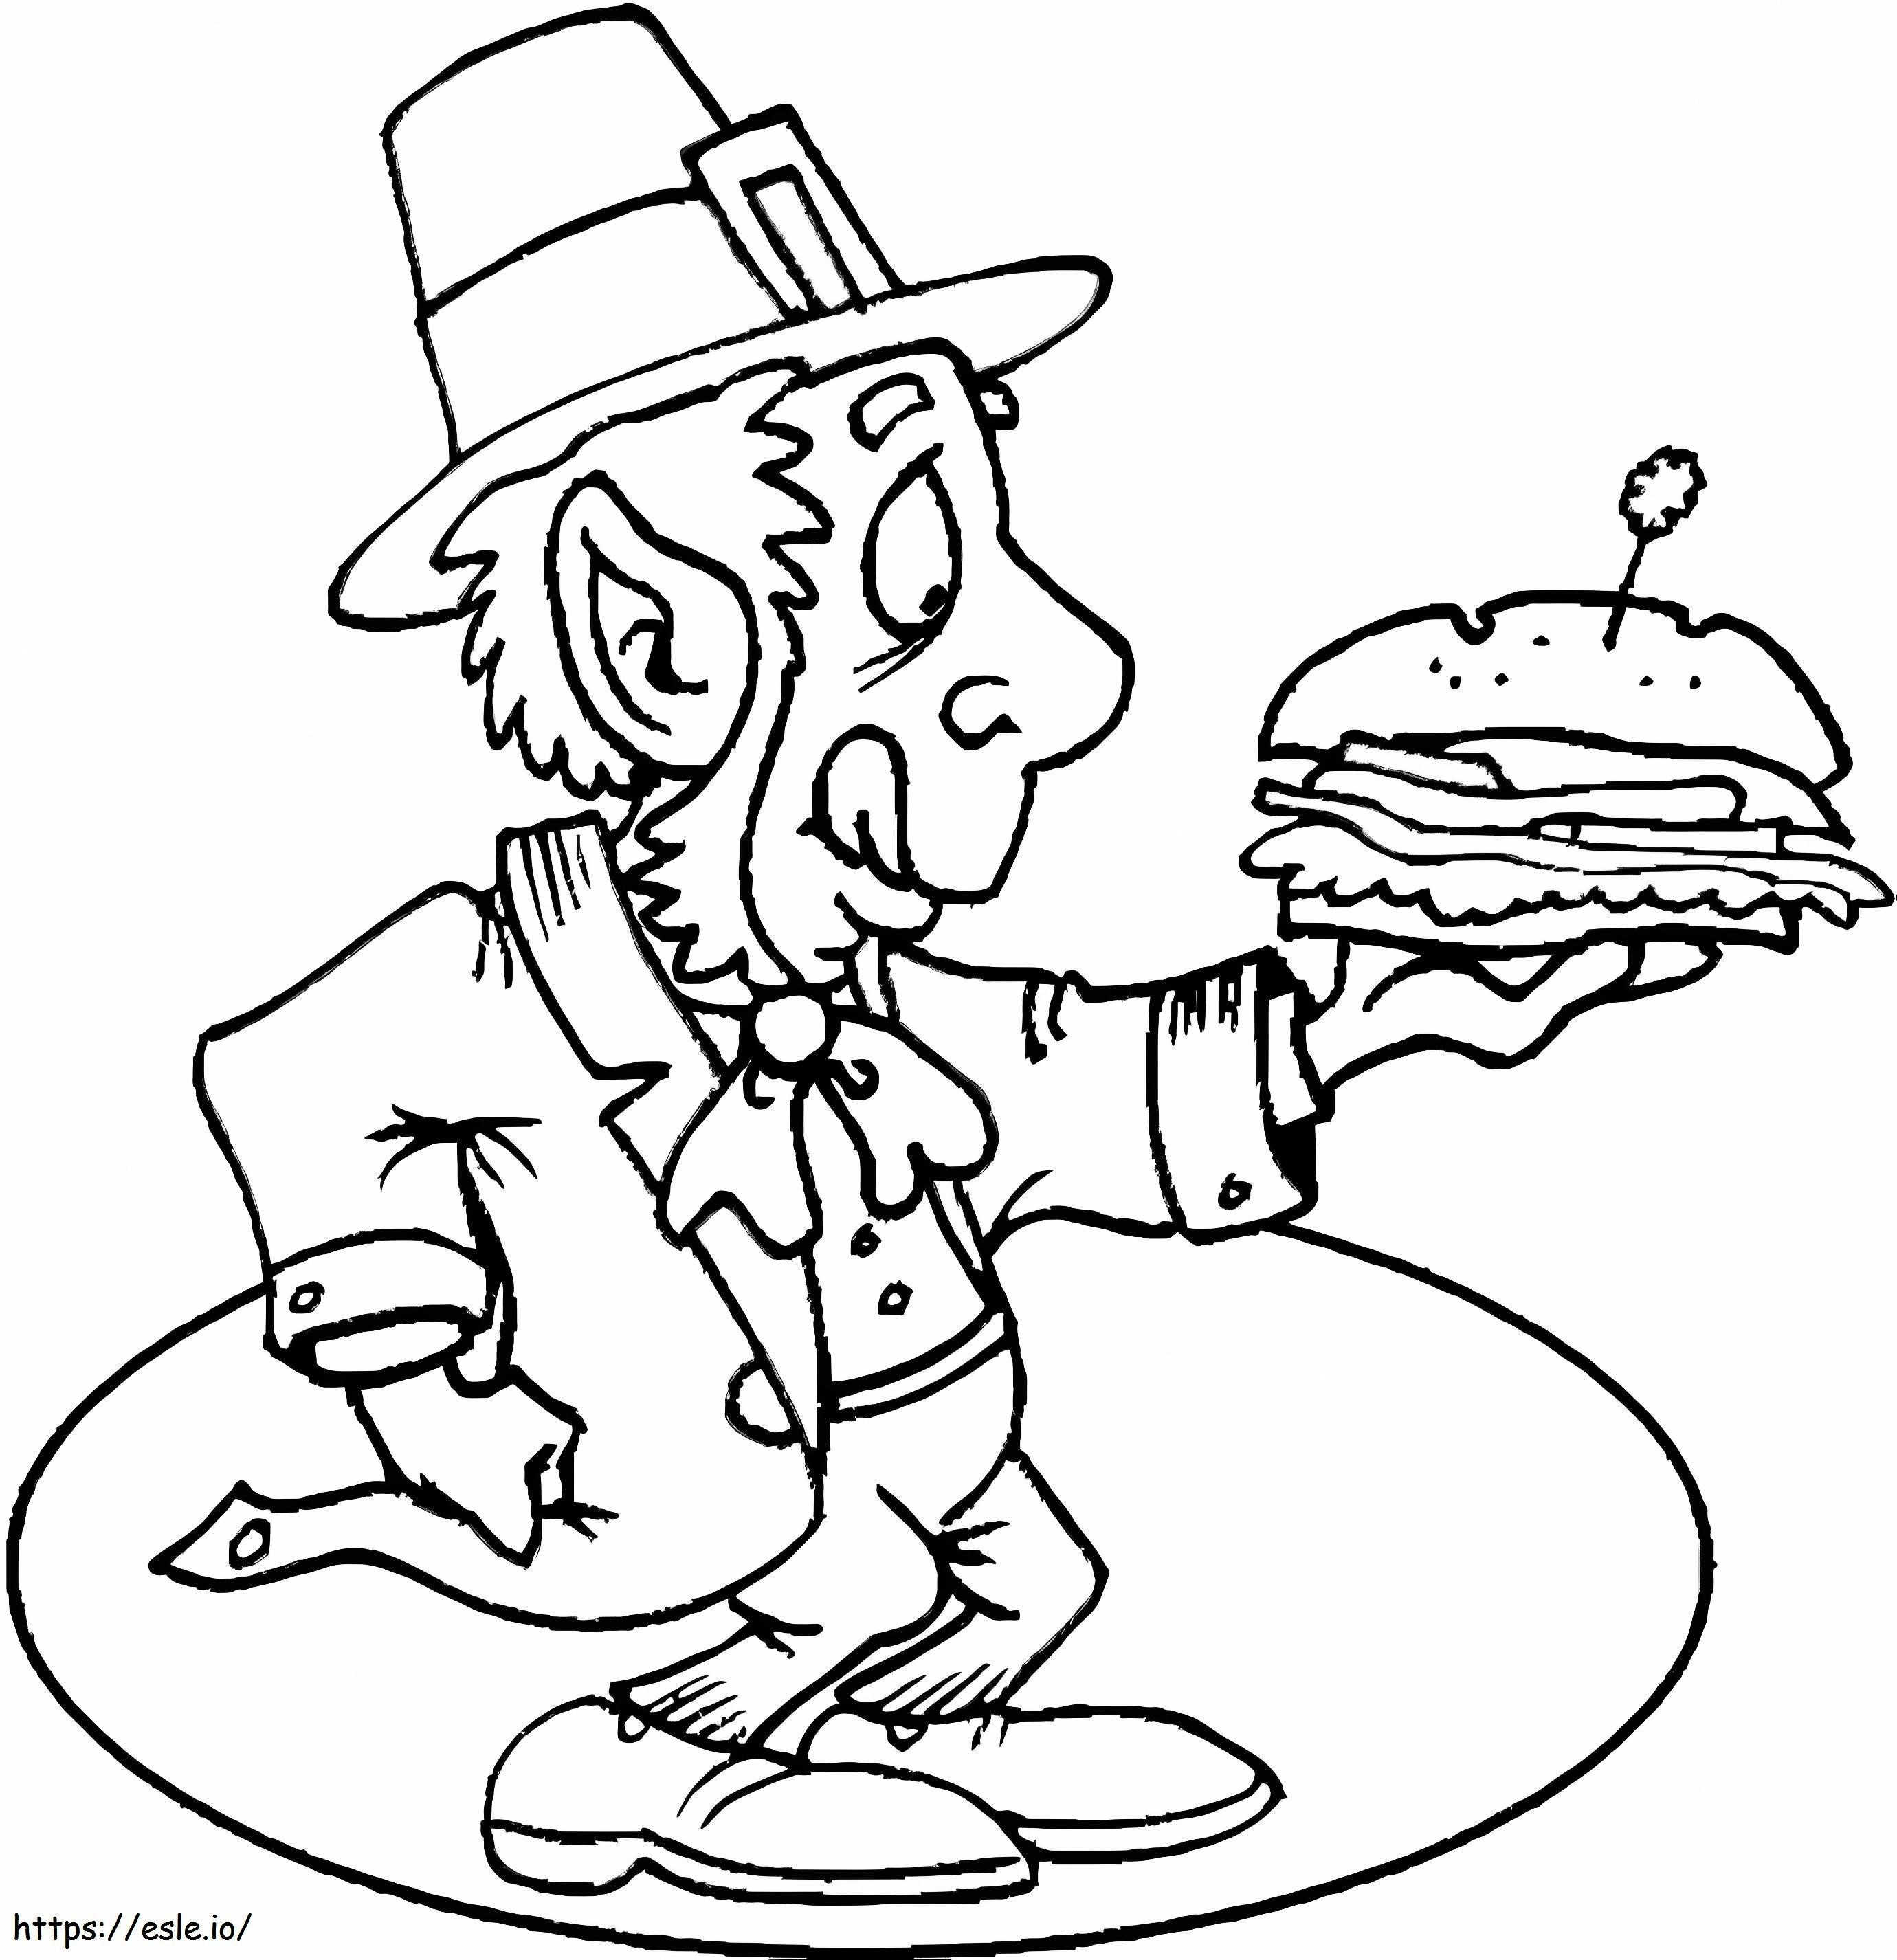 Leprechaun With Sandwich coloring page